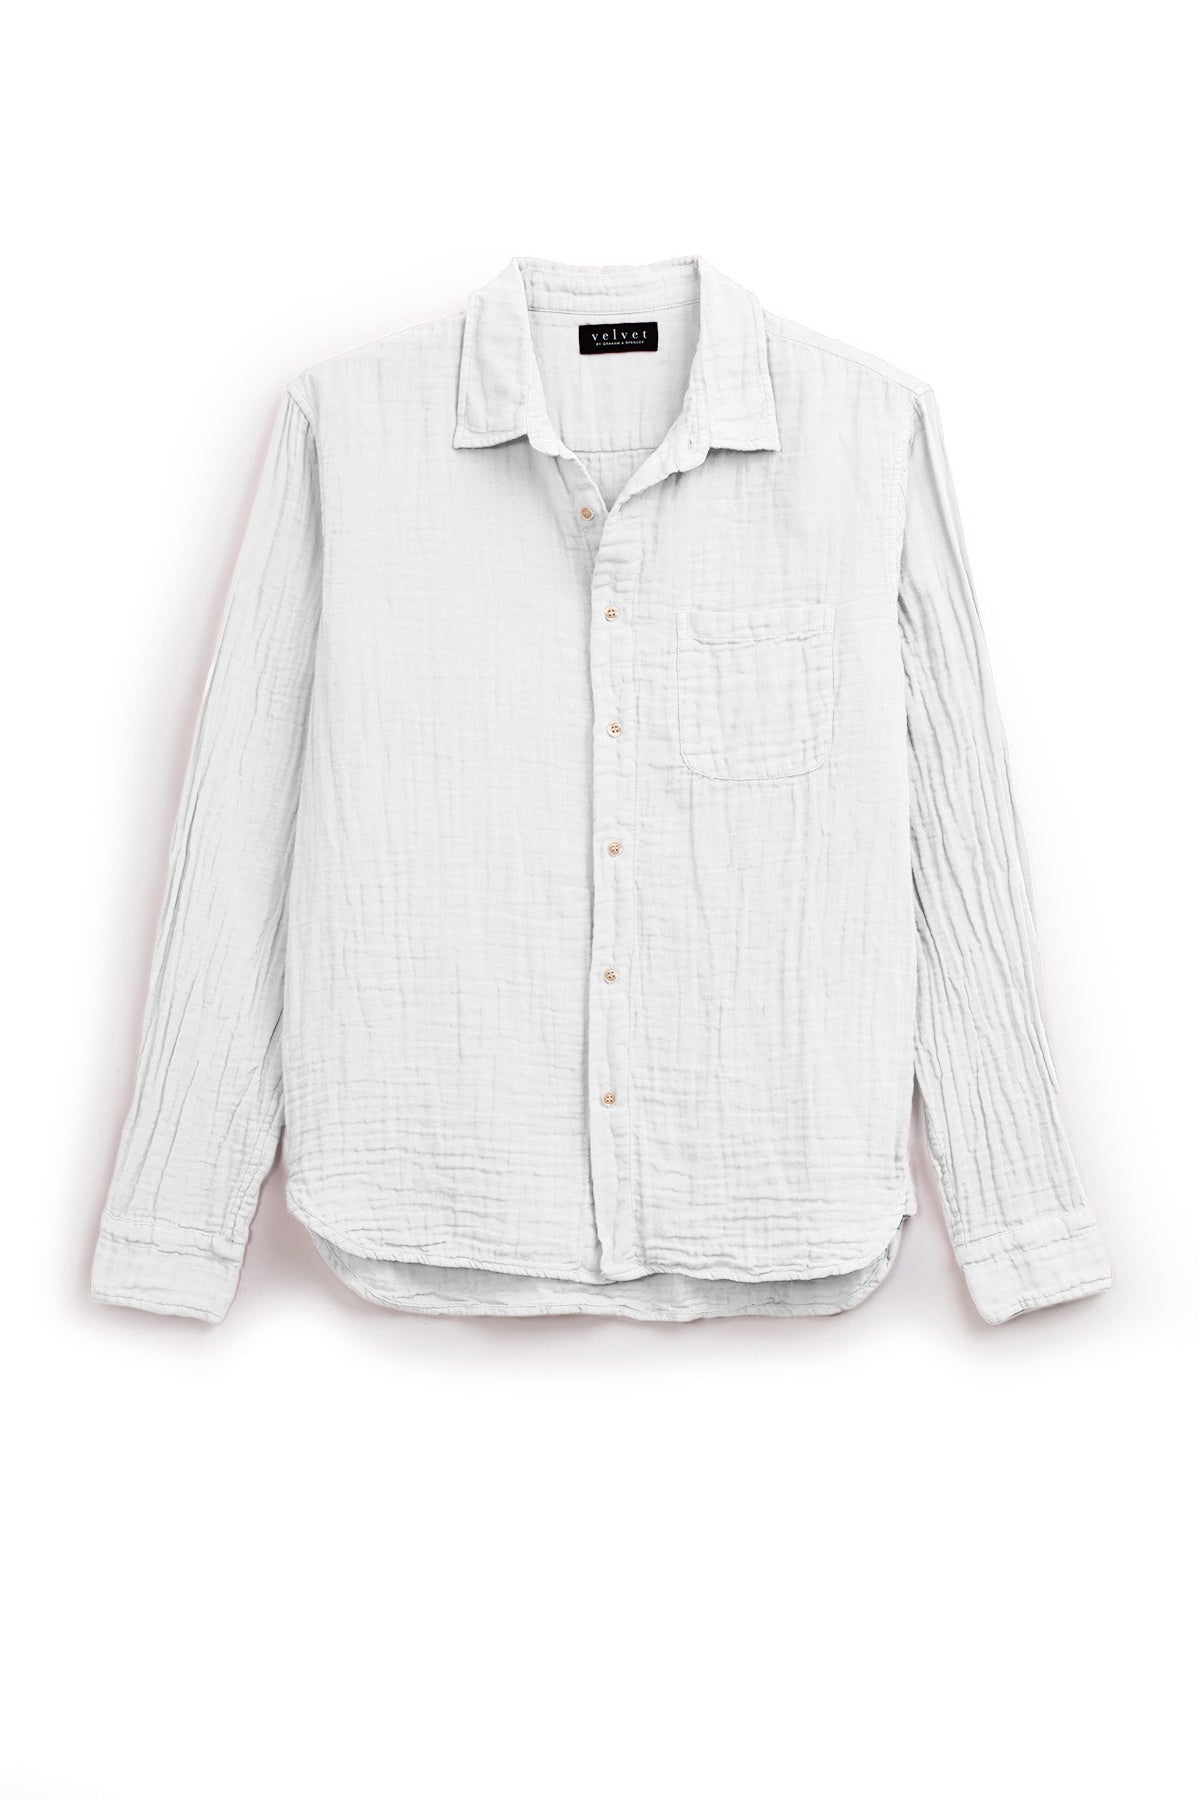 White ELTON COTTON GAUZE BUTTON-UP SHIRT with a chest pocket, displayed flat on a plain background by Velvet by Graham & Spencer.-35995110834369